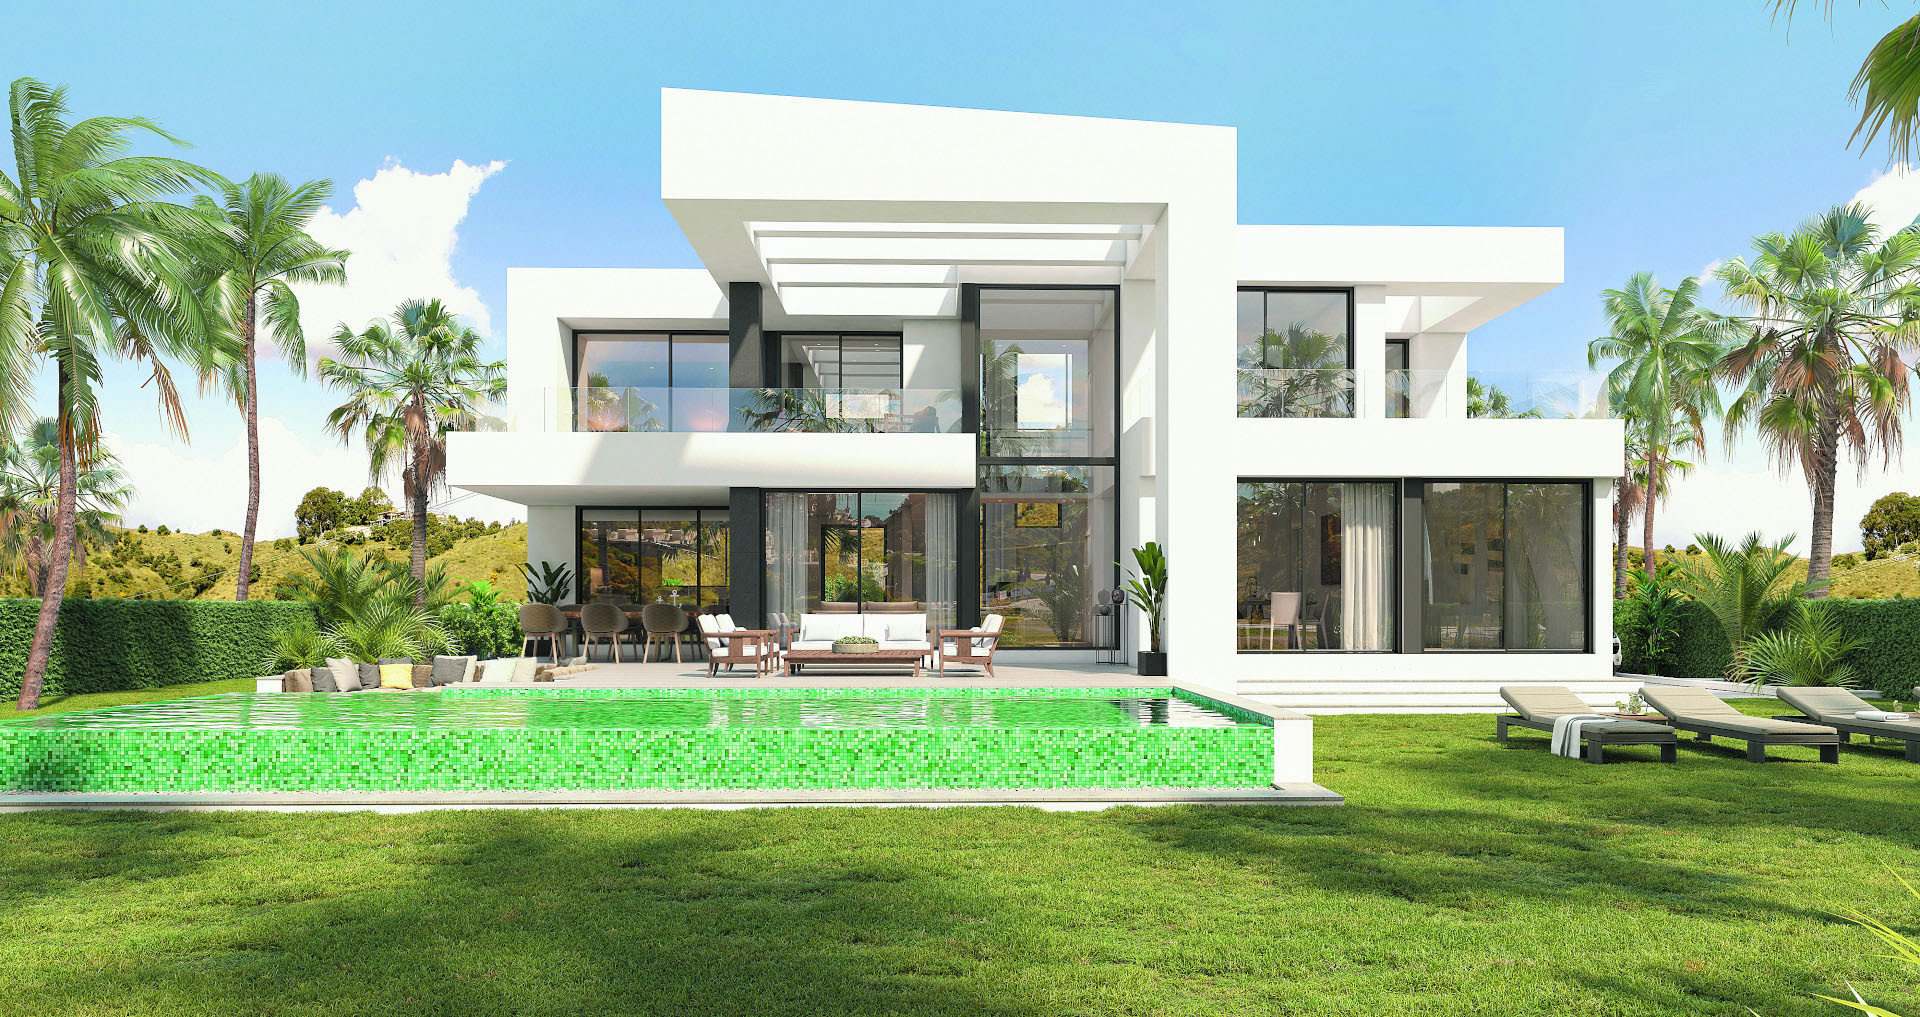 Exclusive villa with luxury finishes overlooking the coast of Malaga.